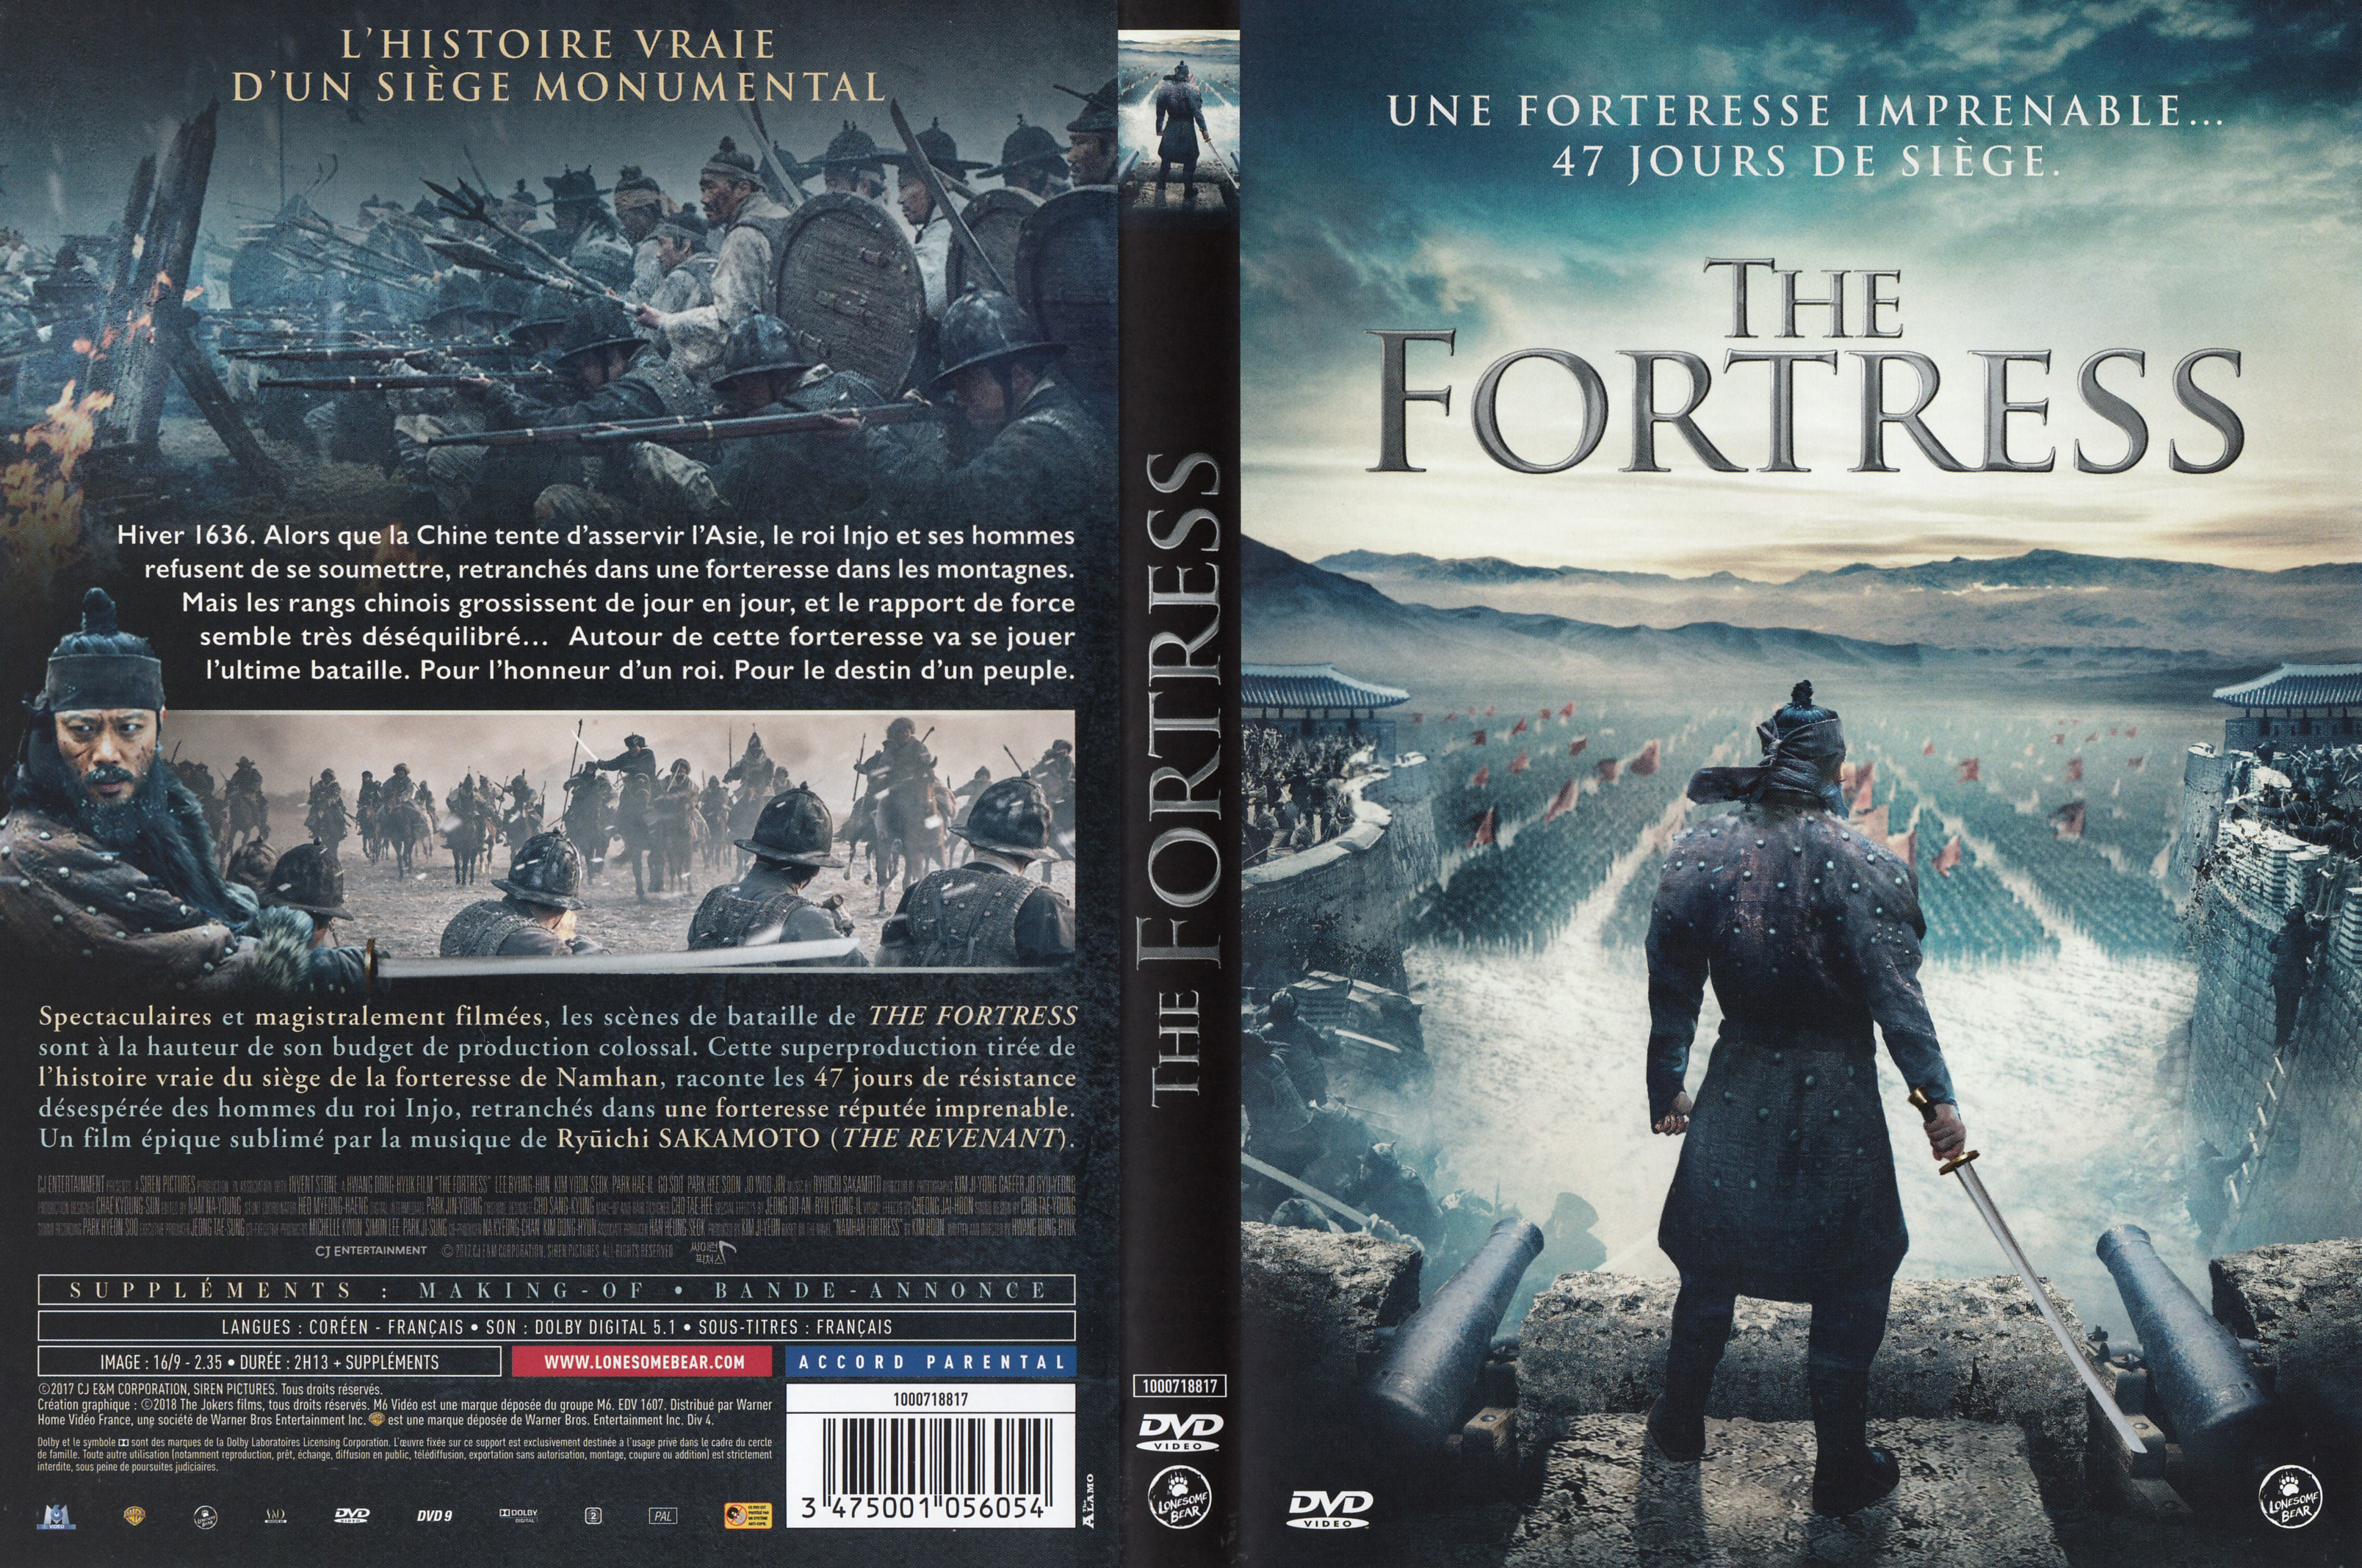 Jaquette DVD The fortress